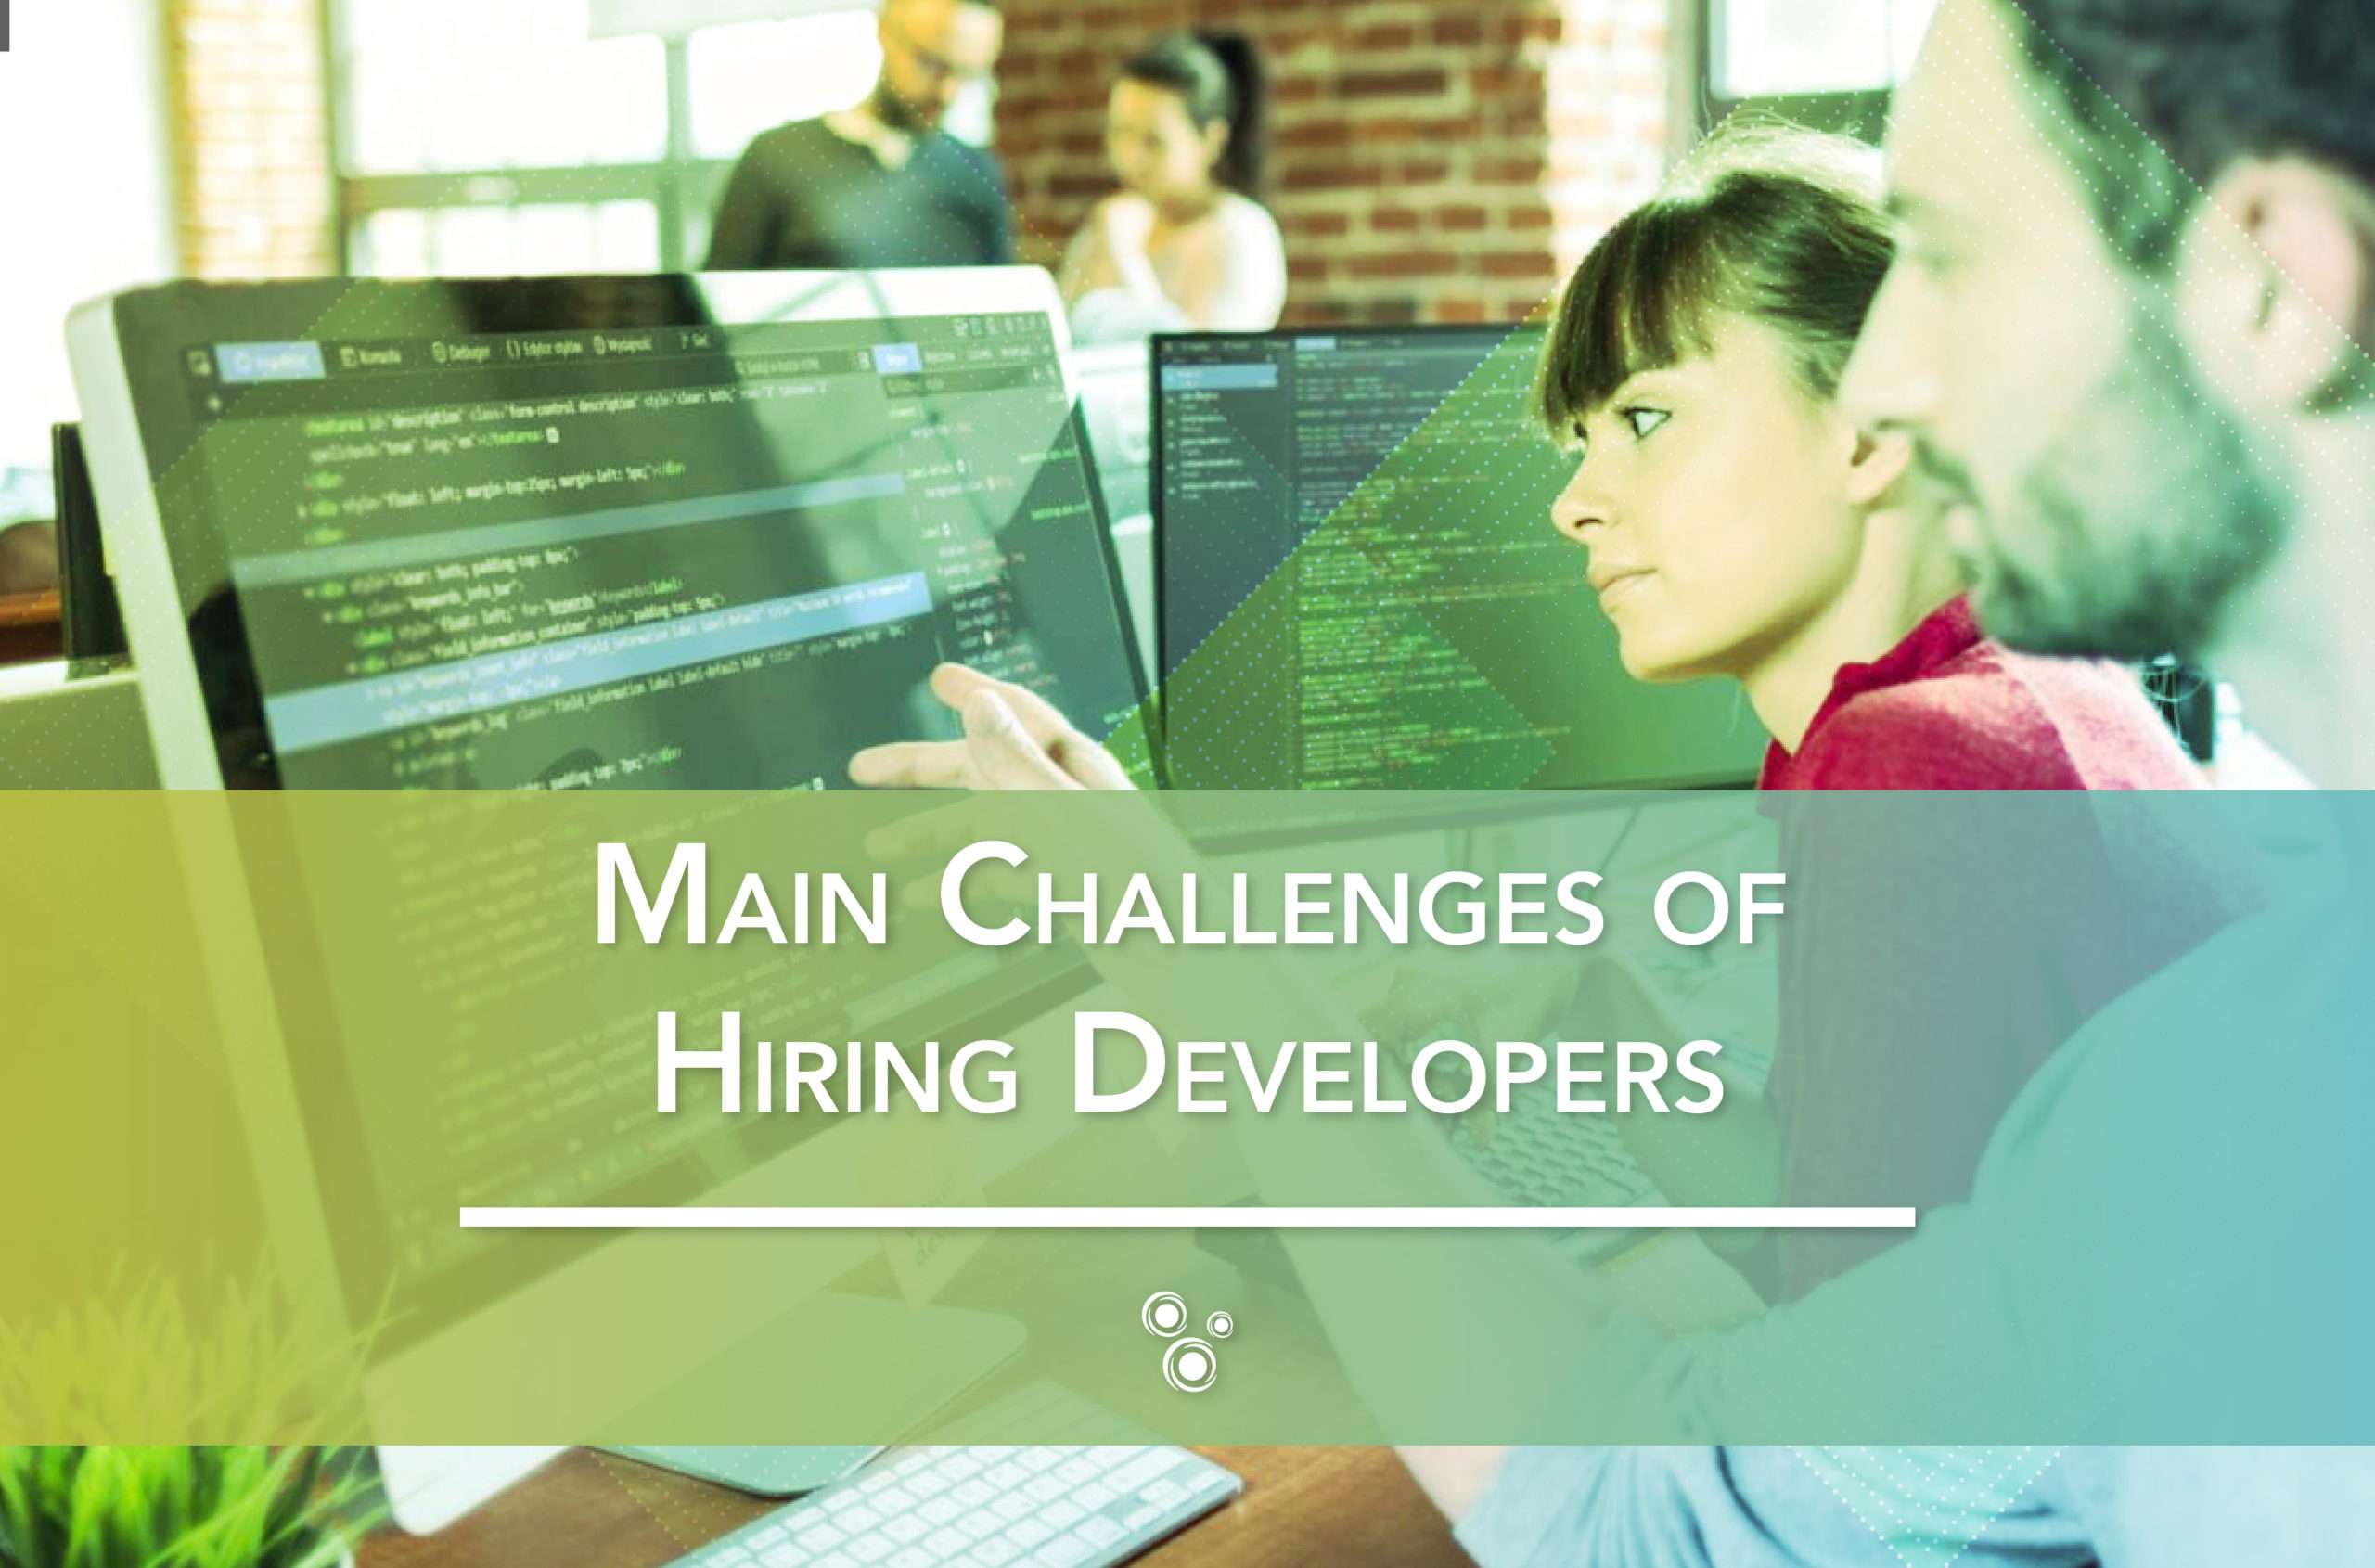 Main Challenges of Hiring Developers